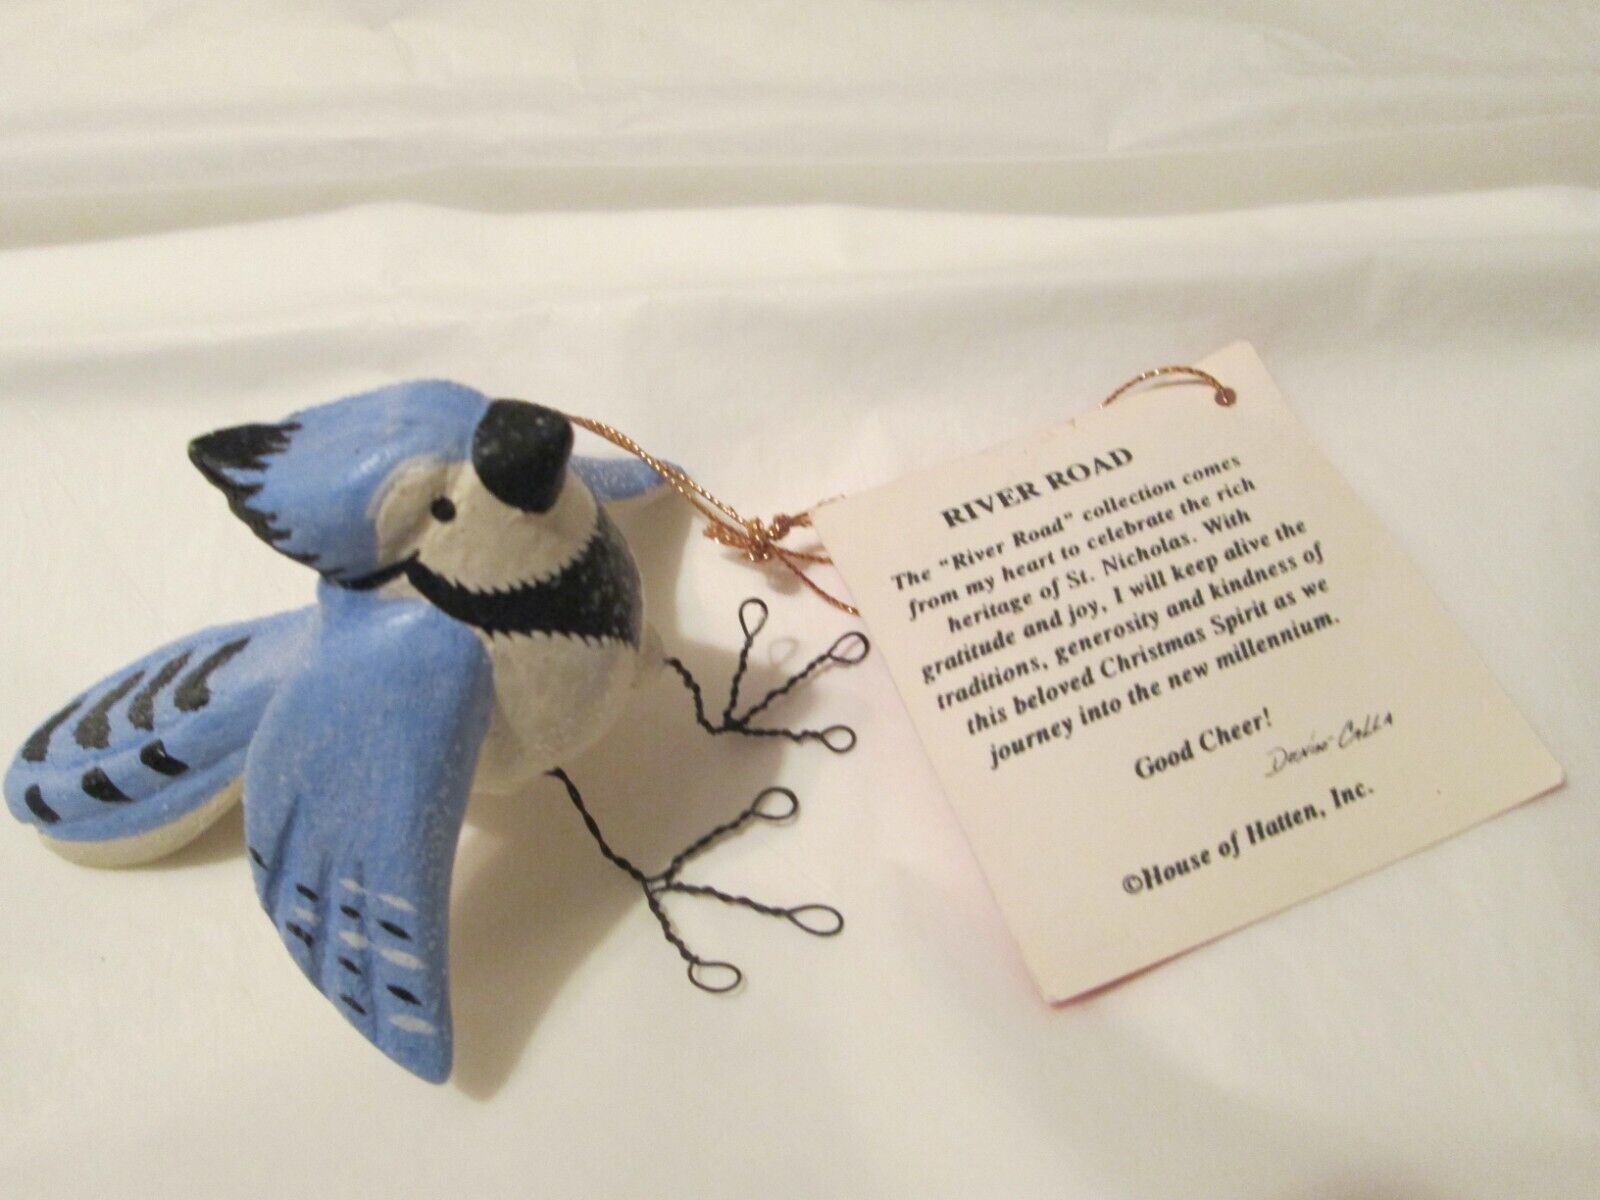 D Denise Calla House Of Hatten Blue Jay Bird Ornament 2000 Rare Tag River Road